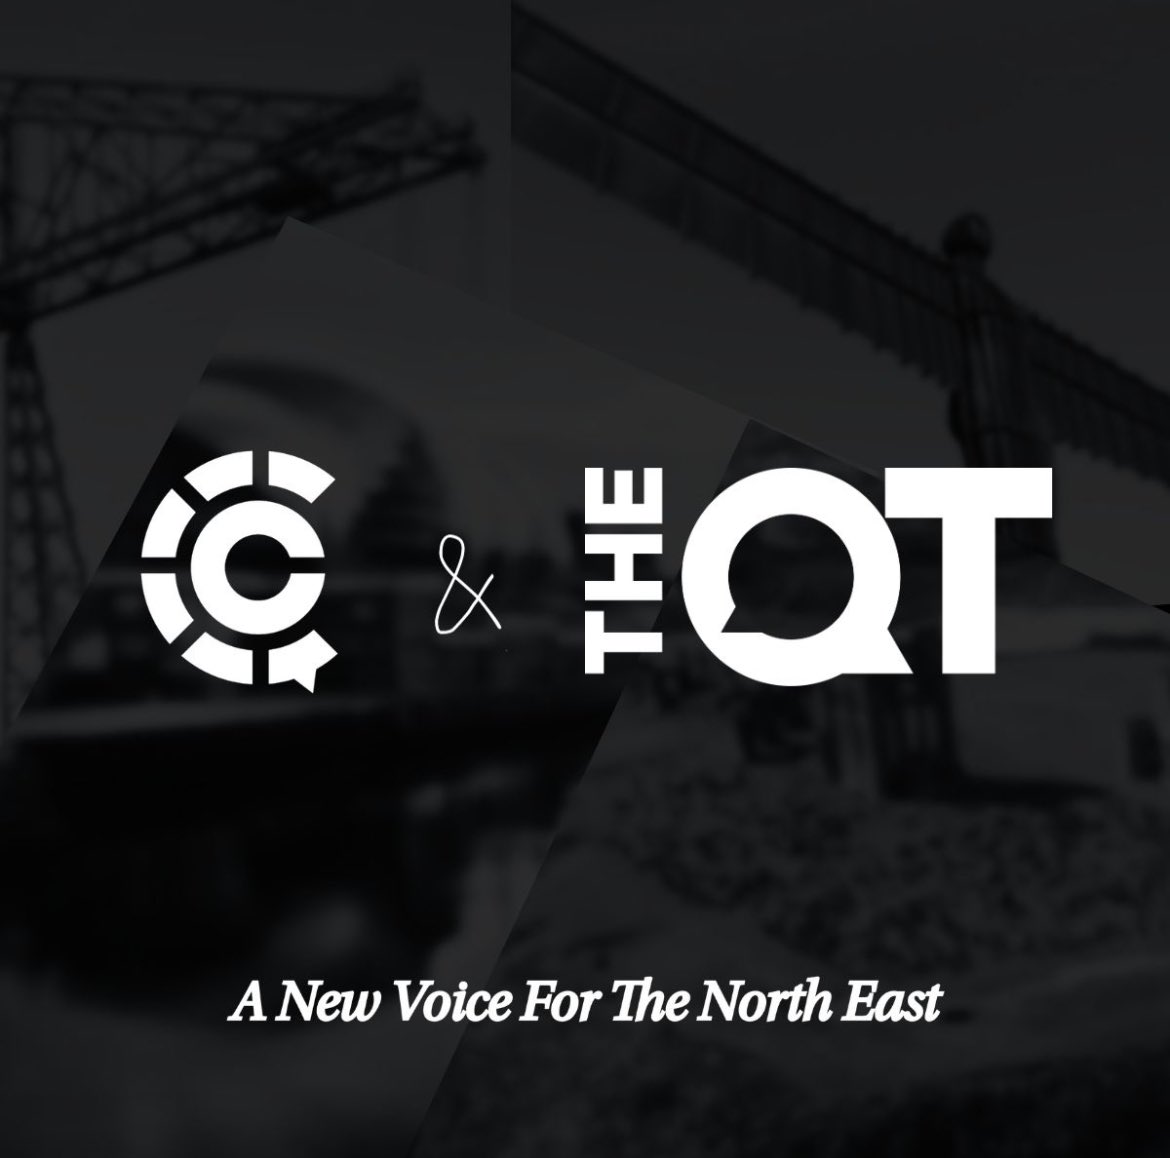 We are so excited about this one. 🤩 We’re very proud to say Colehouse will be working on the launch and growth of The QT, a new online media platform for the North East with a mission to deliver quality regional journalism. 'A New Voice For The North East' We love what The QT